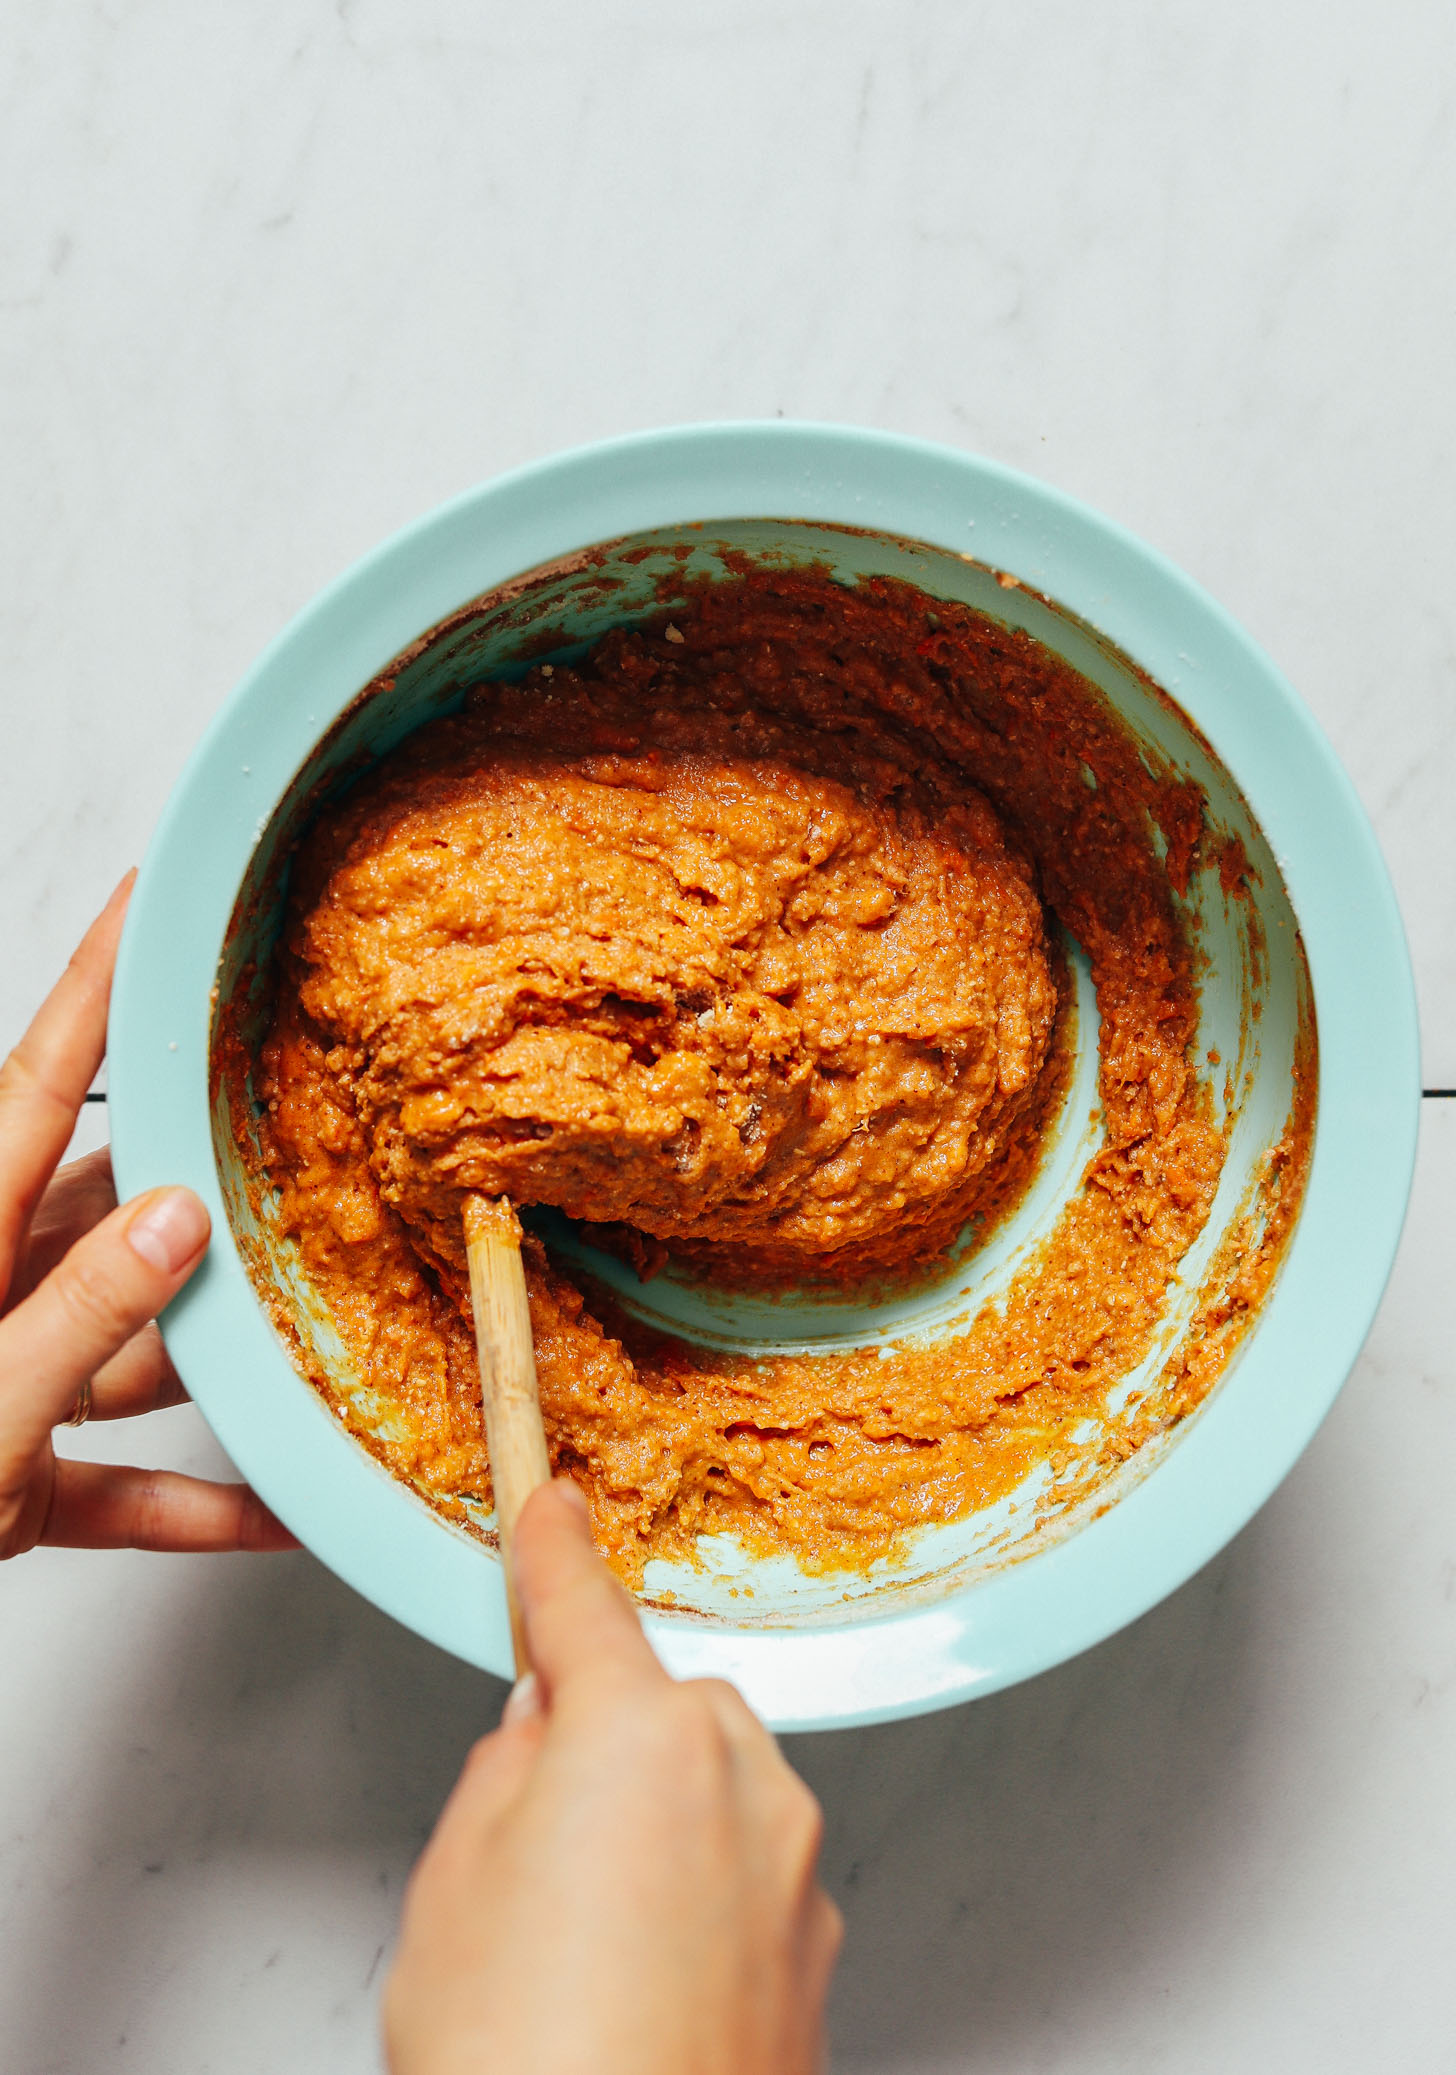 Using a wooden spoon to stir the batter for our Almond Butter Sweet Potato Muffins recipe